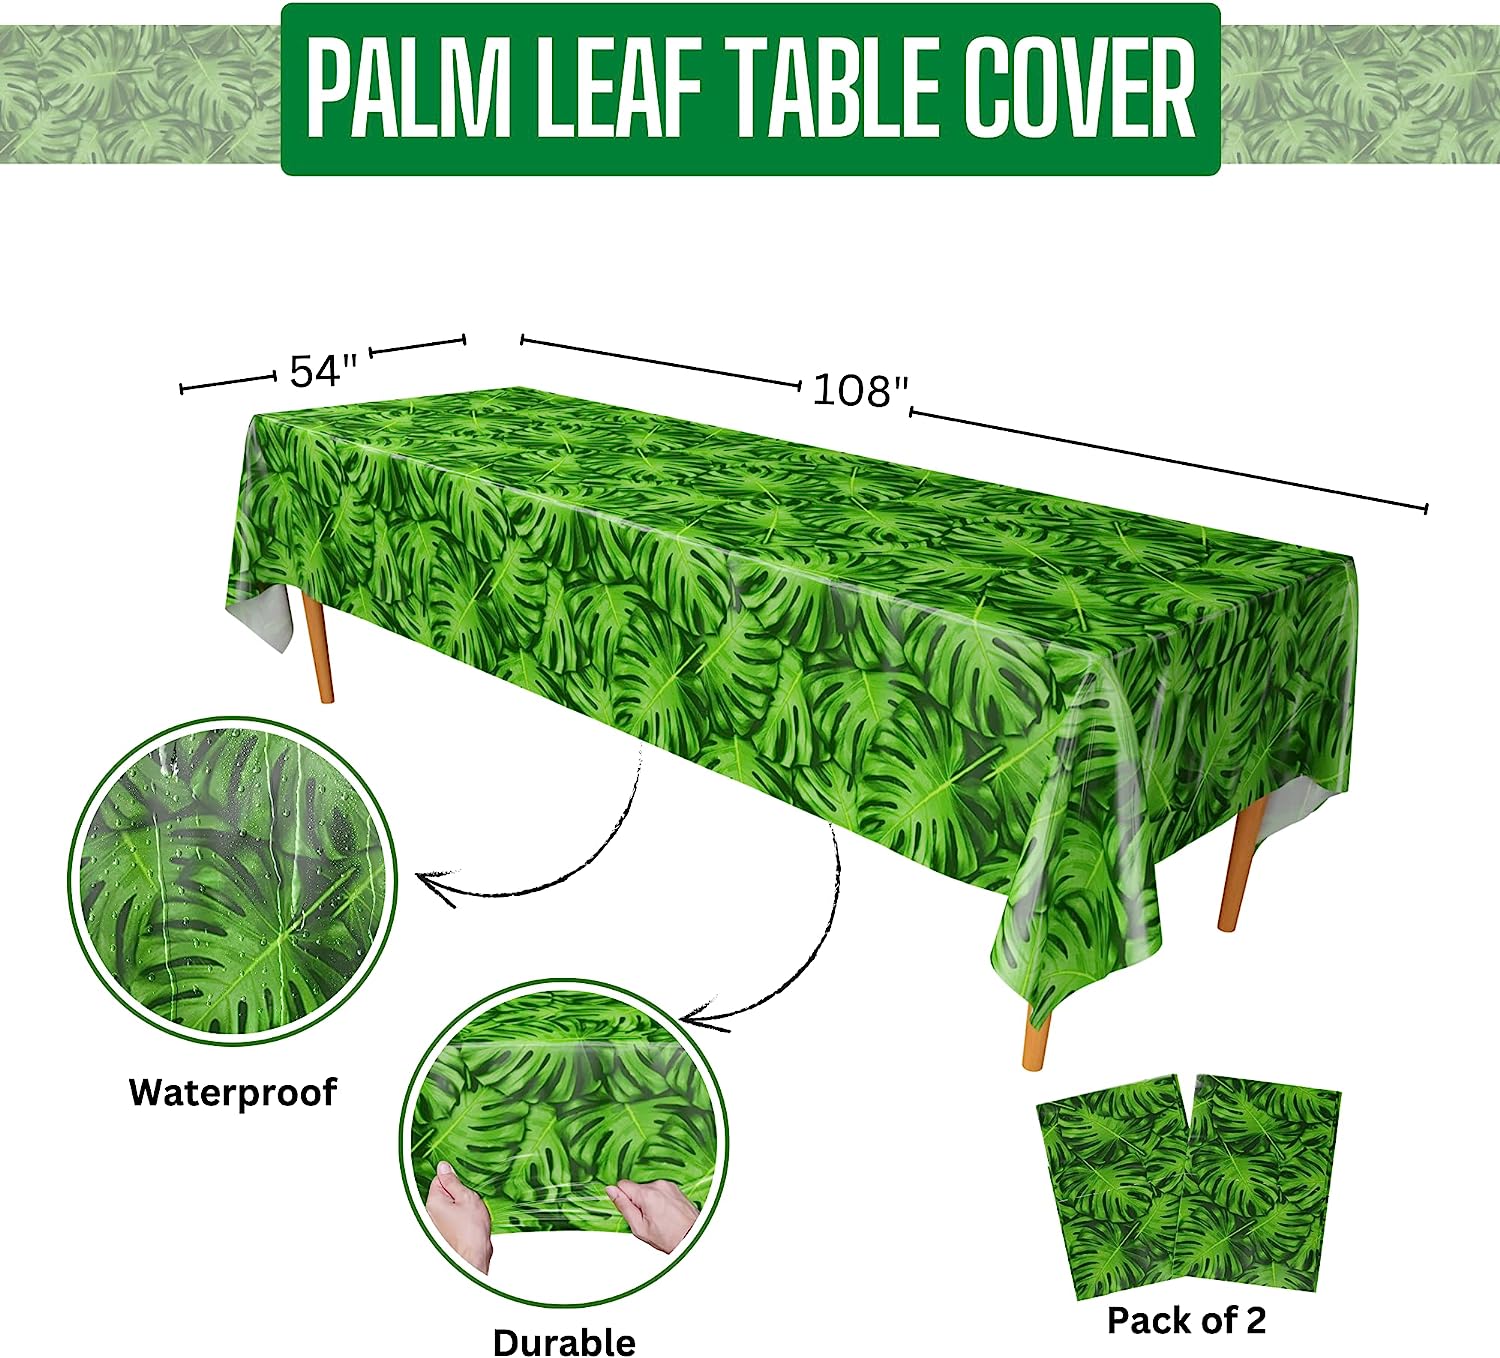 Two waterproof and durable palm leaf patterned table covers, each measuring approximately 108 inches by 54 inches, displayed on a wooden table with a white background.